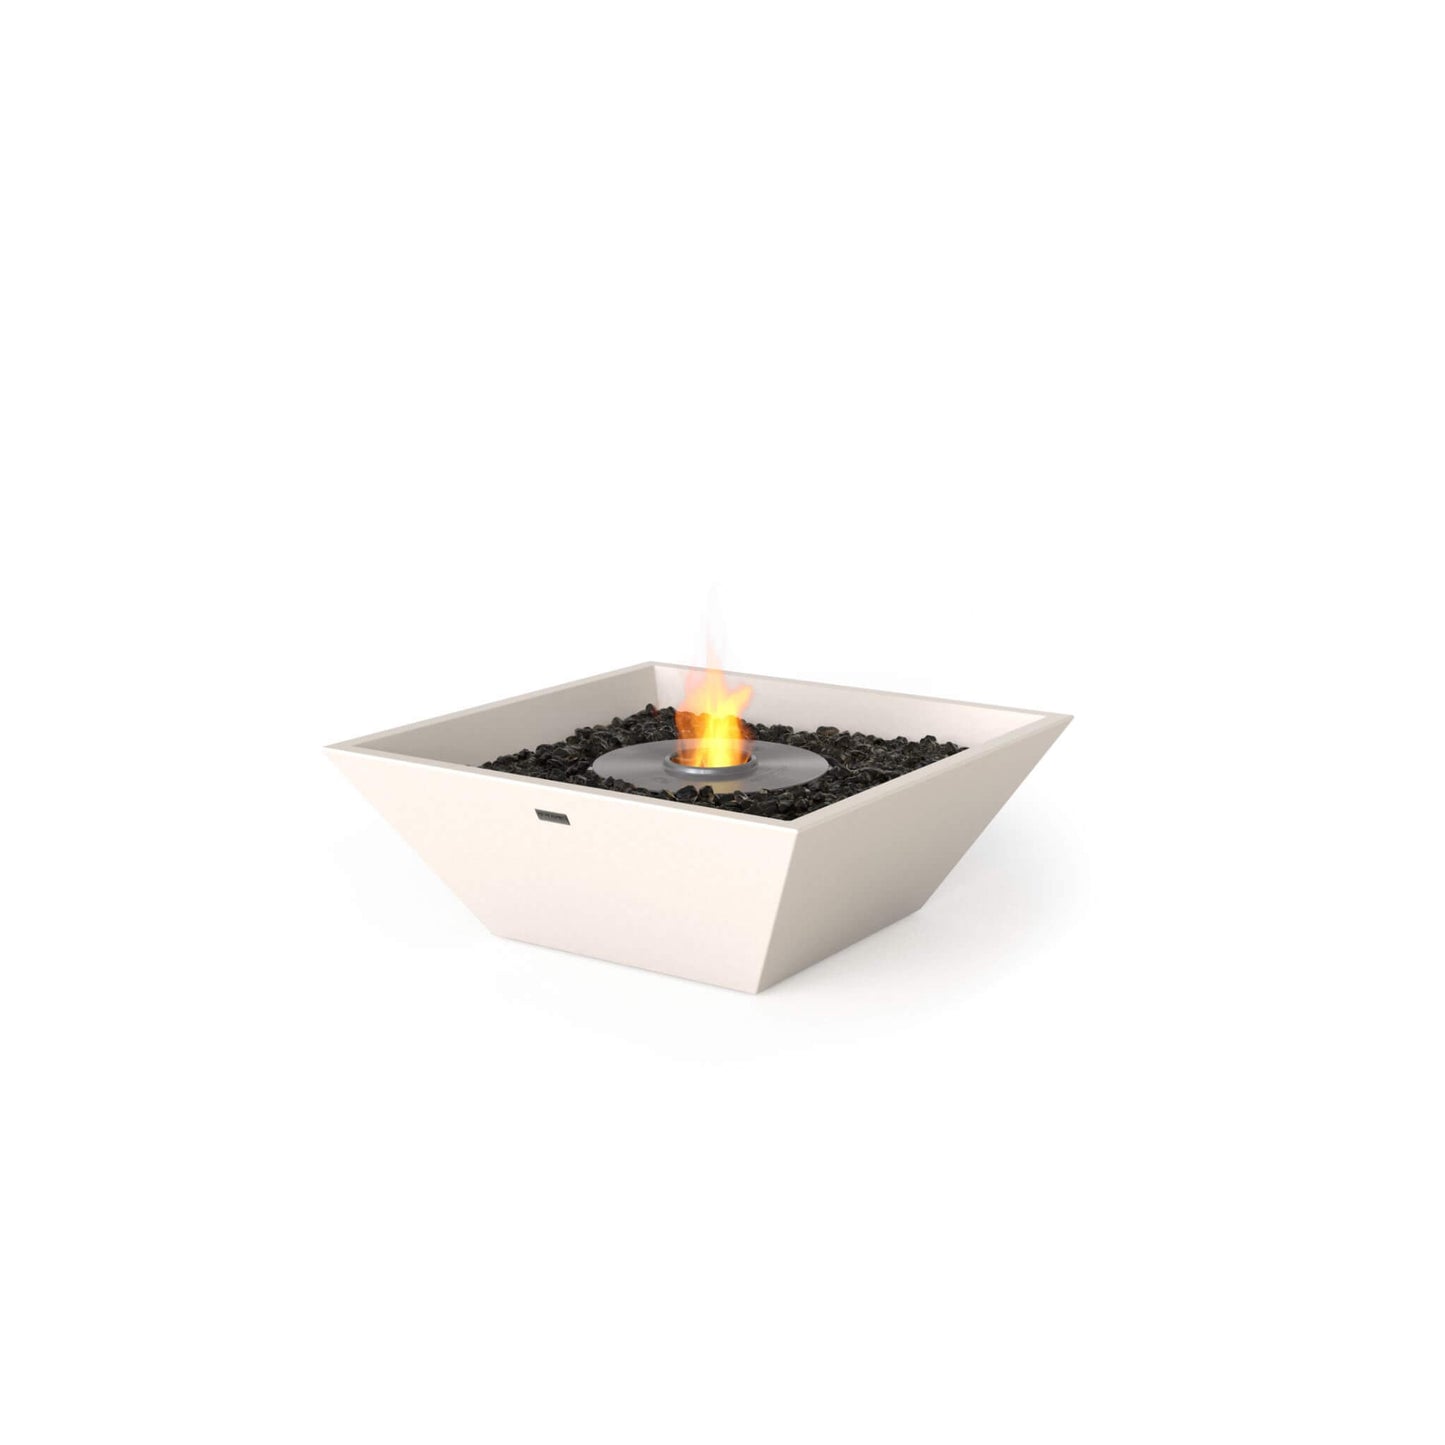 Ecosmart Fire Nova 600 bioethanol garden fire pit square bowl in concrete white with stainless steel ethanol burner